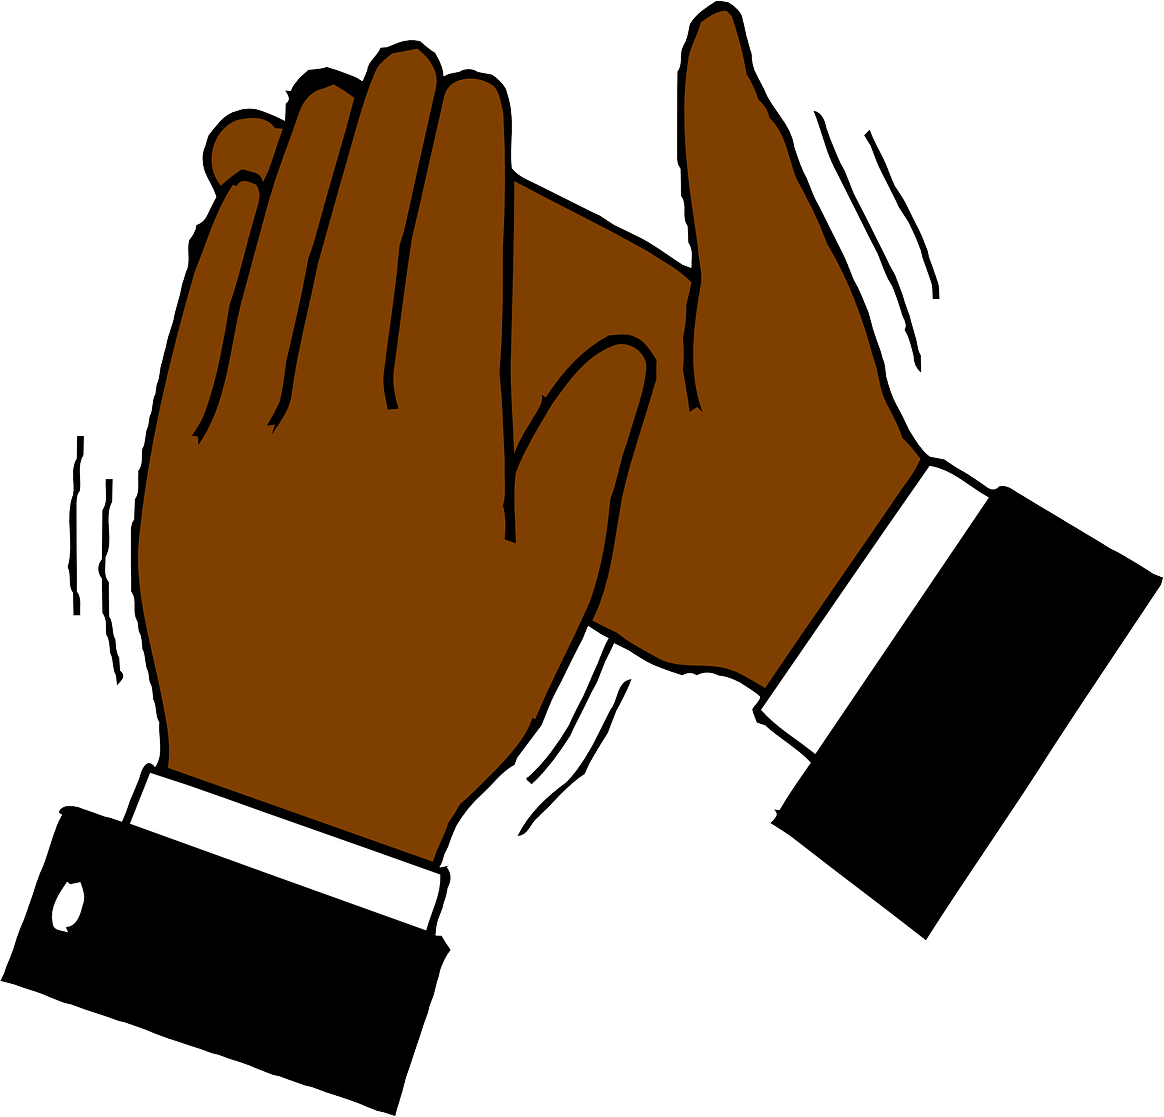 Clapping Hands PNG Free File Download